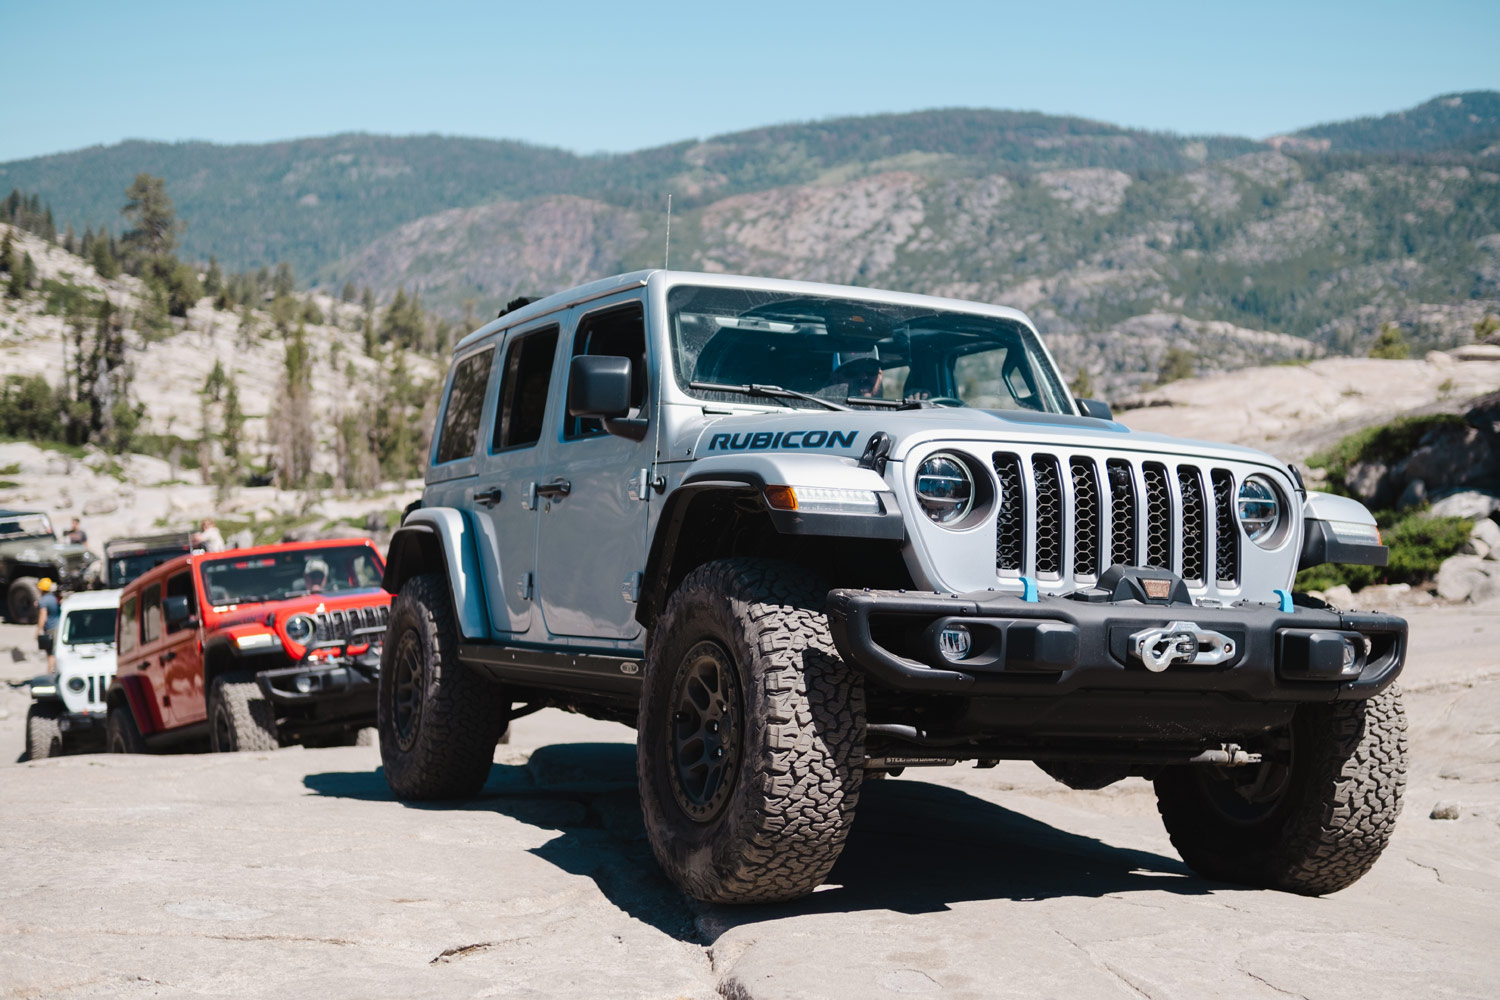 Silver Jeep Wrangler Rubicon leads group of Jeeps off-road